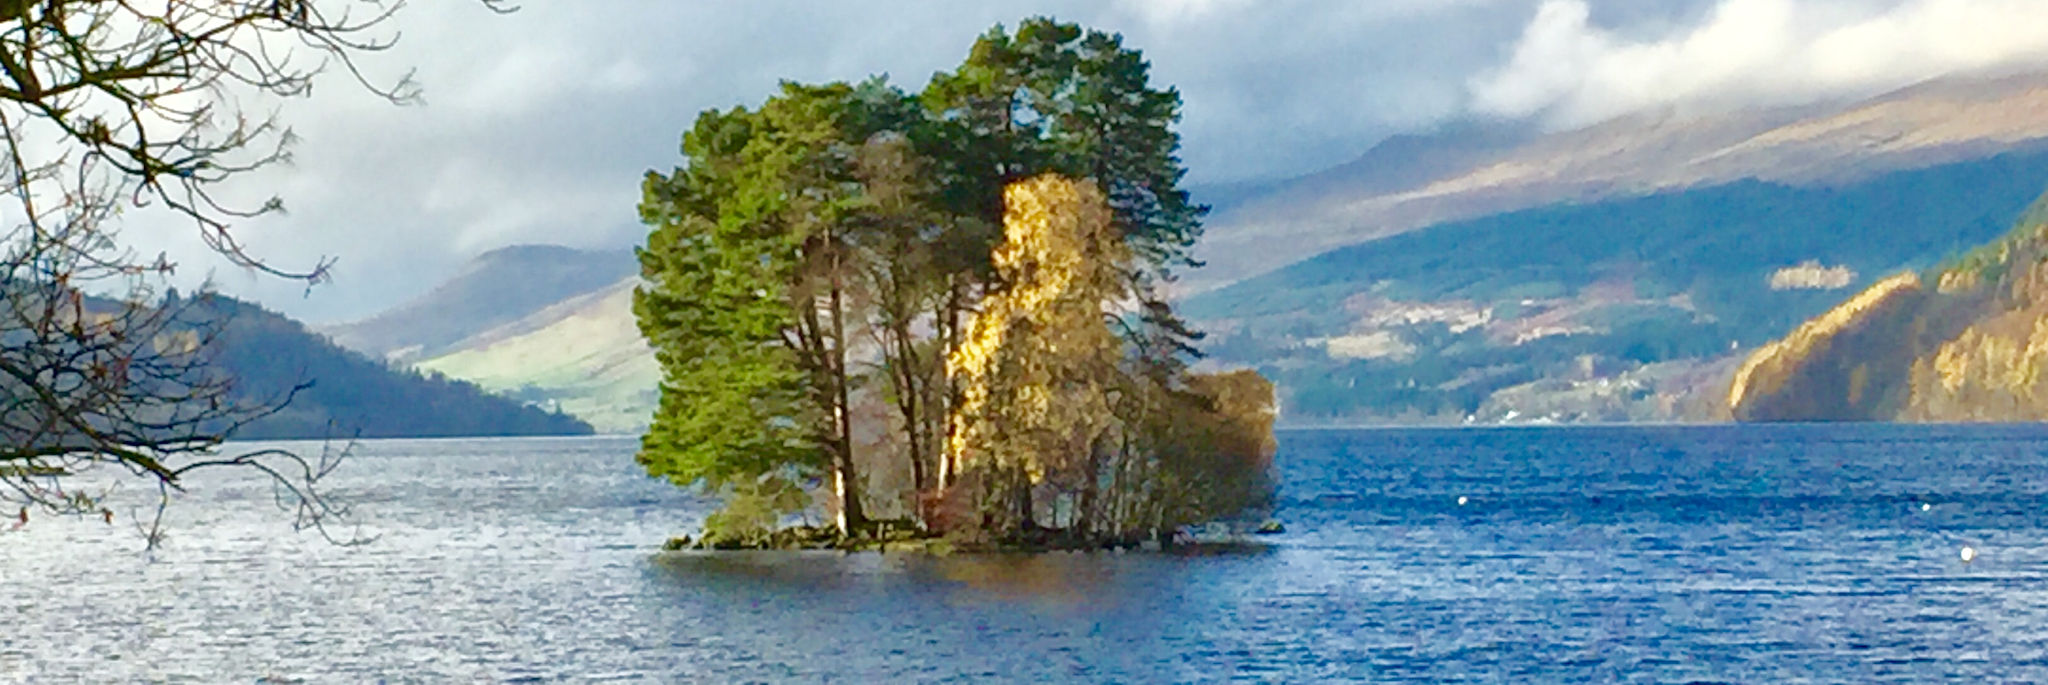 Autumn trees at Loch Tay, Perthshire